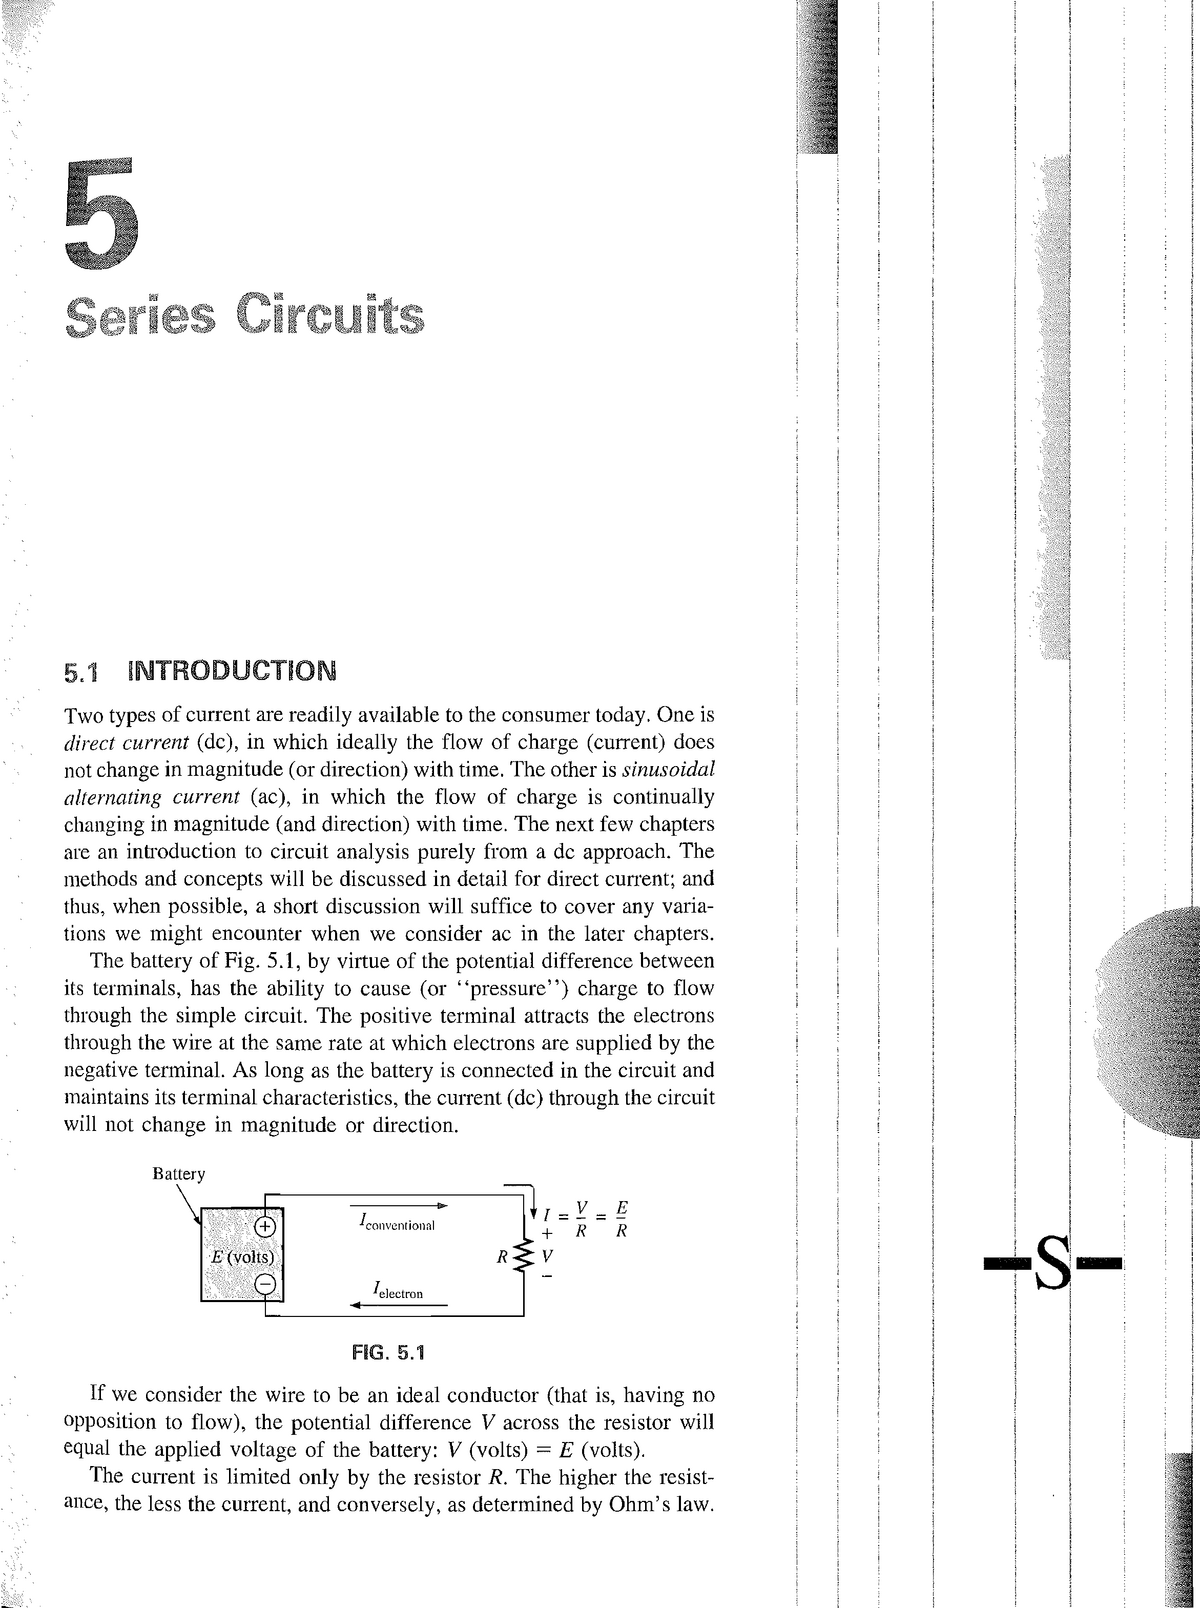 series-circuits-1-copy-1-introduction-two-types-of-current-are-readily-available-to-the